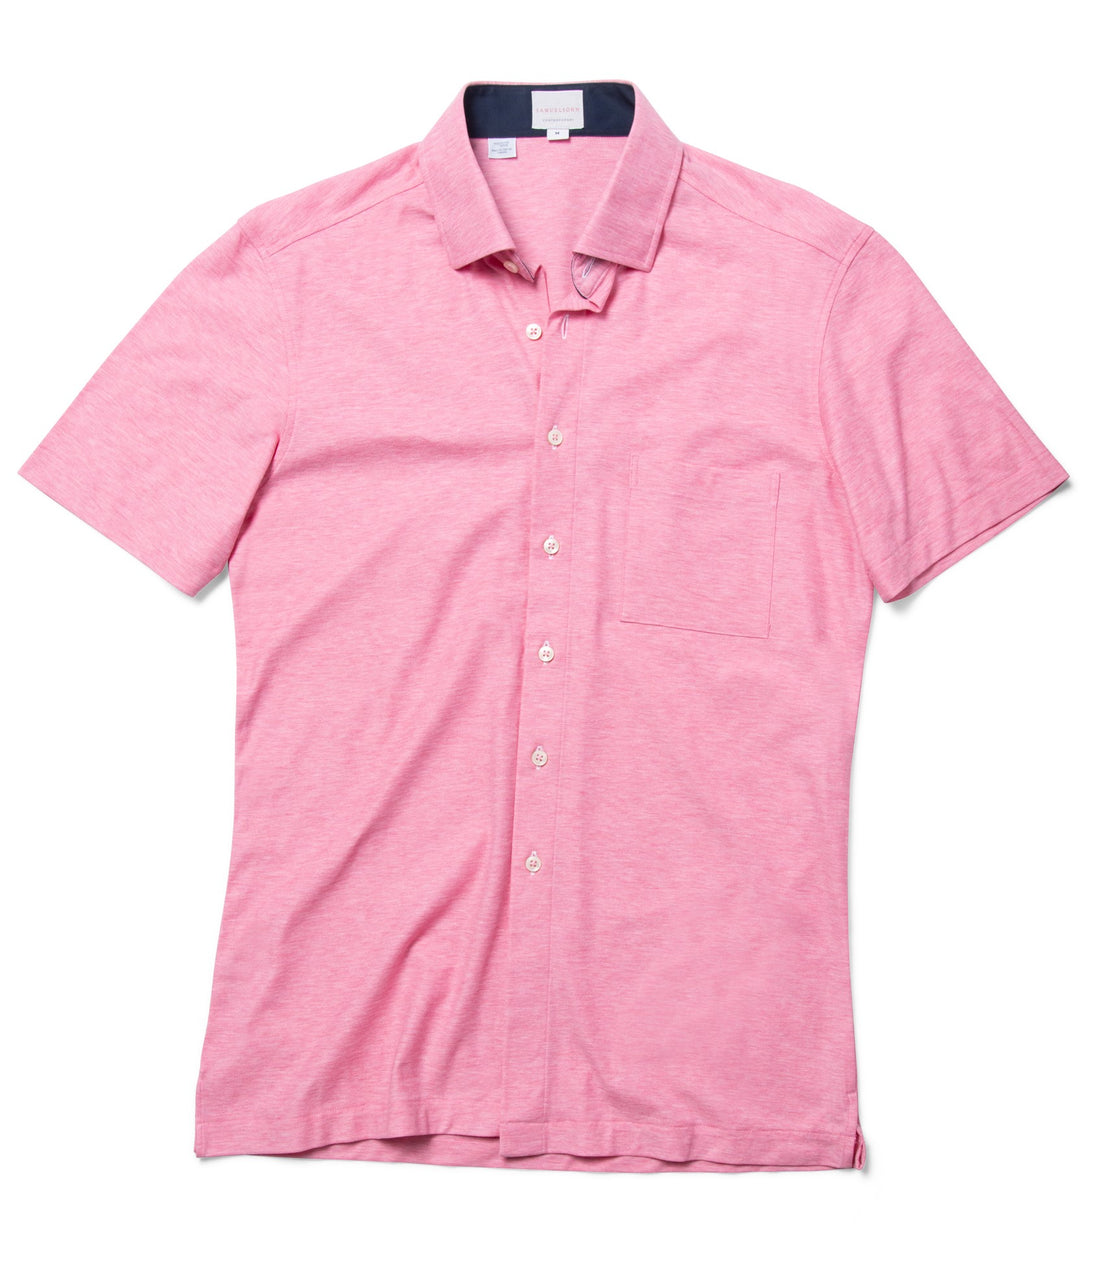 Watermelon pink designer pique knit shirt is breathable and lightweight in 100 percent cotton from VUE collection by Samuelsohn